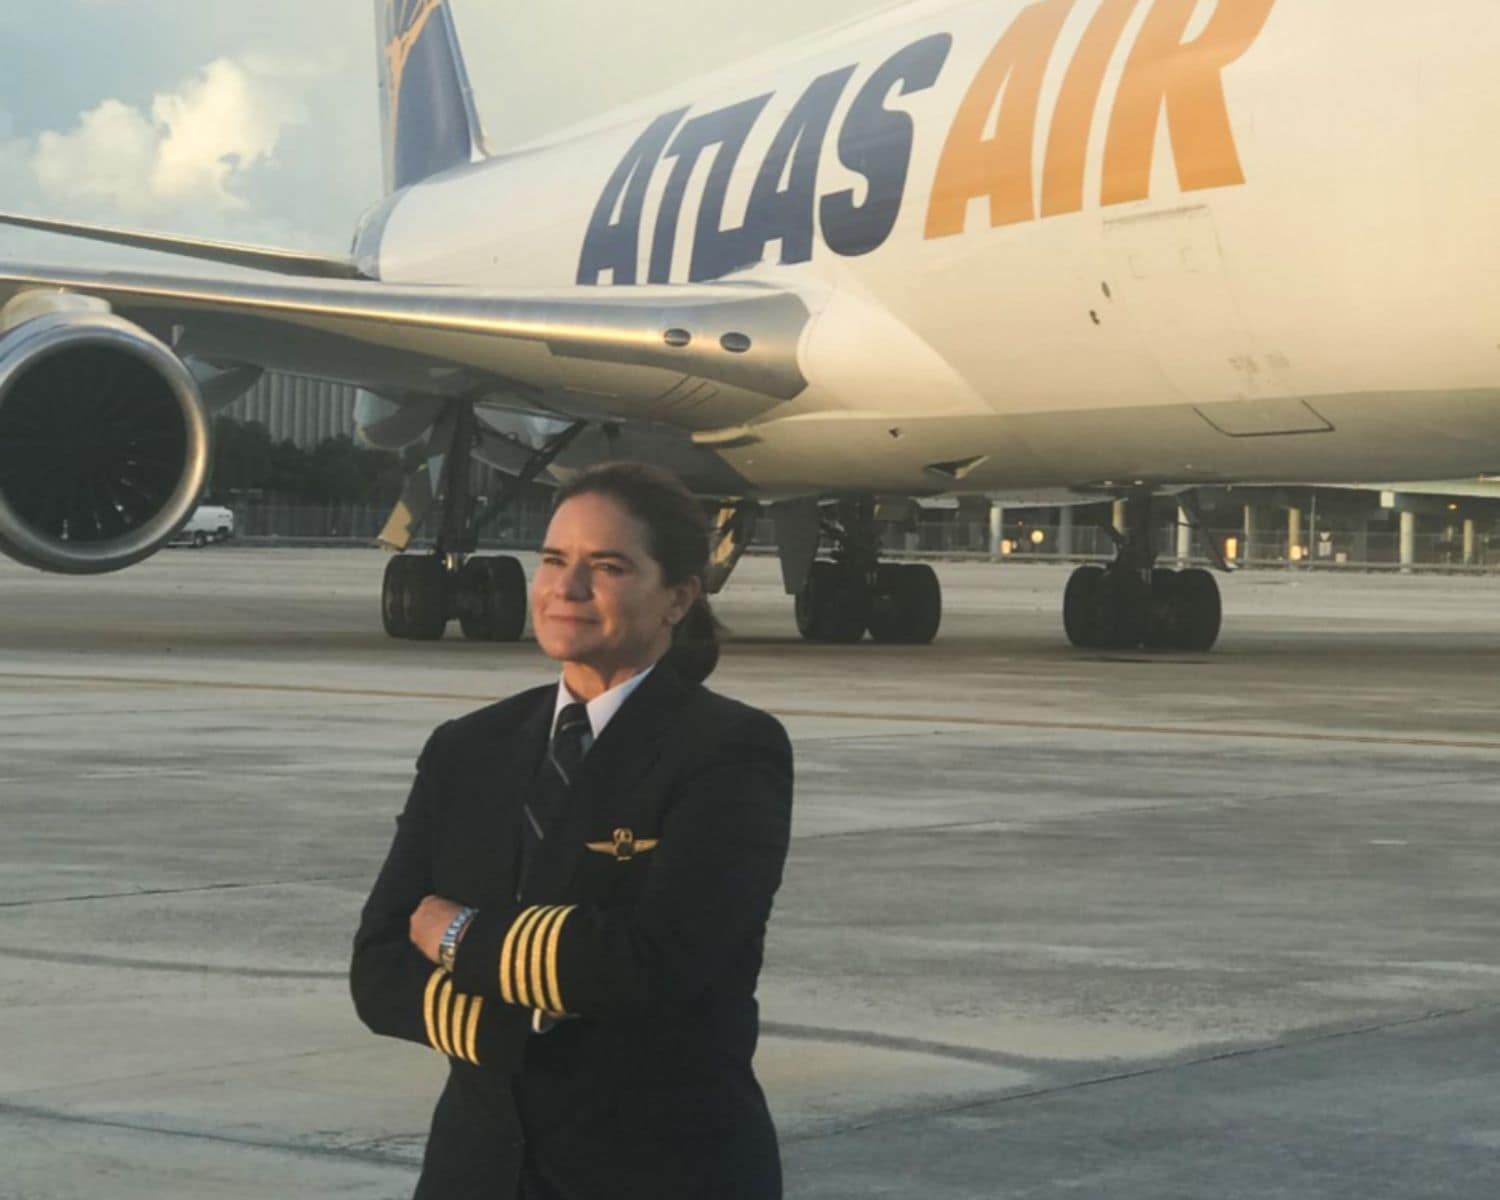 Embry-Riddle alumna and pilot for Atlas Air, Gina Buhl ('89) stands on the runway in front of a Boeing 747. (Photo: Gina Buhl)